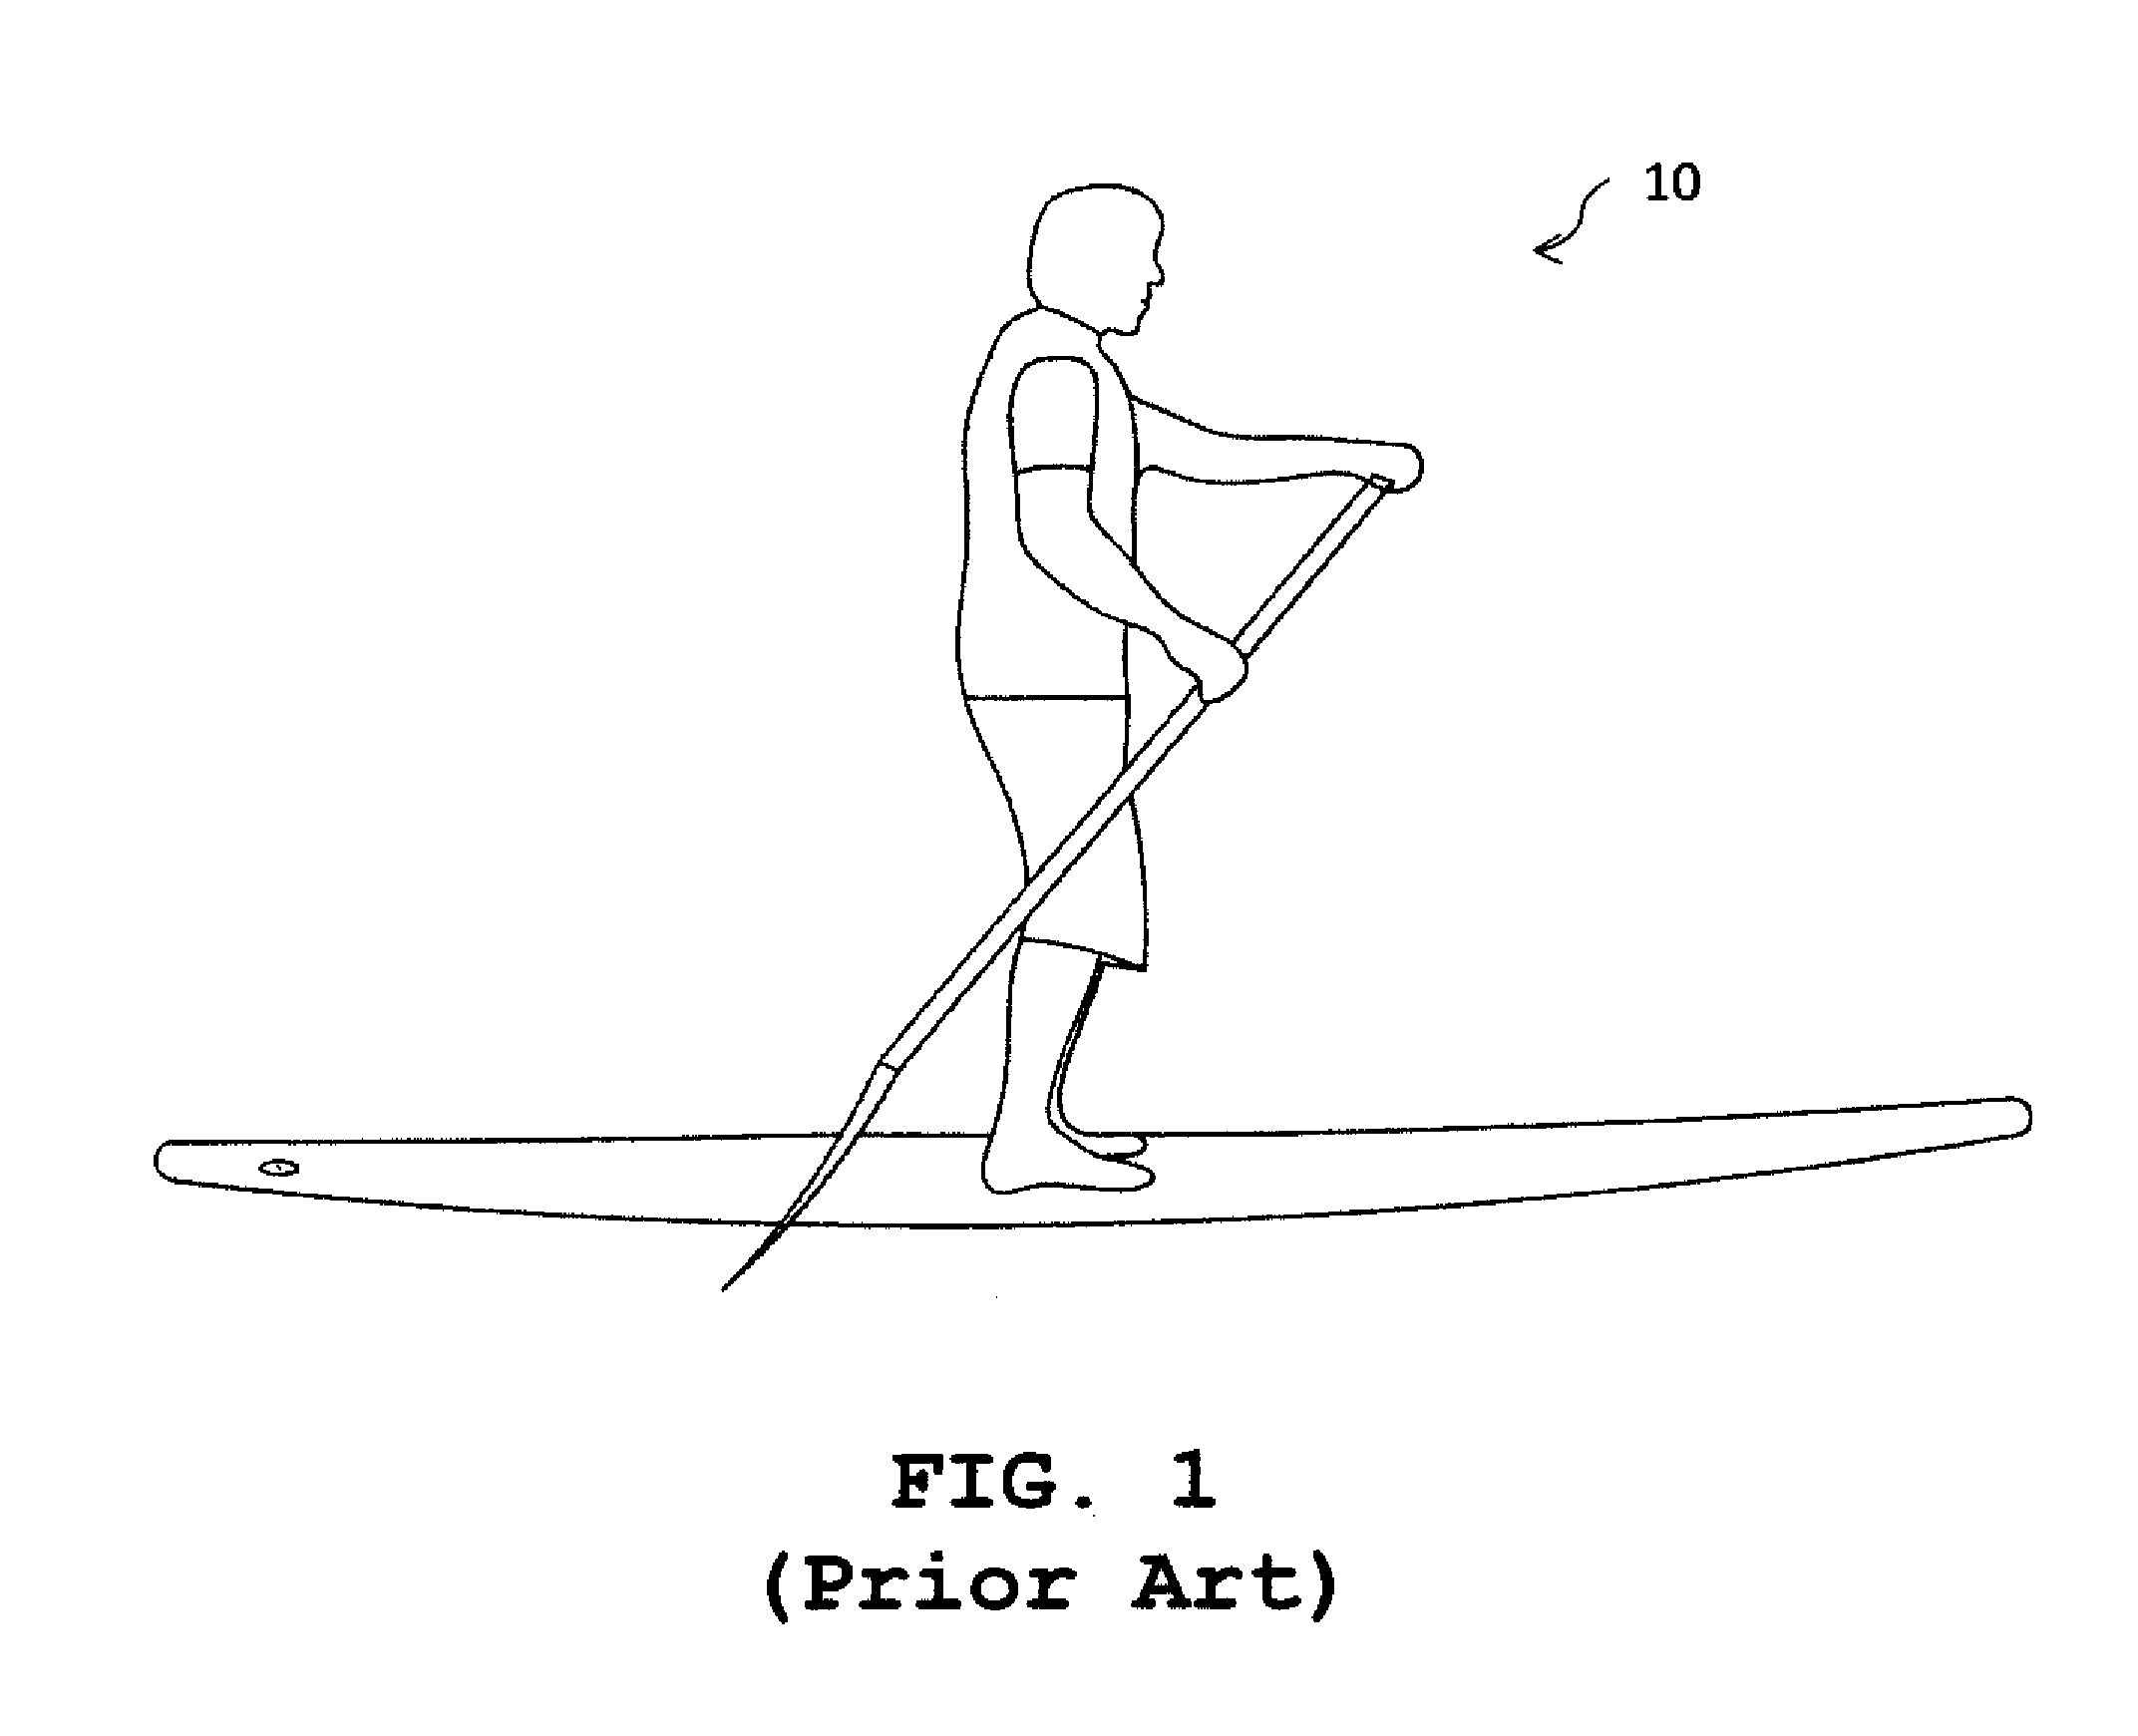 Stand-up paddle harness